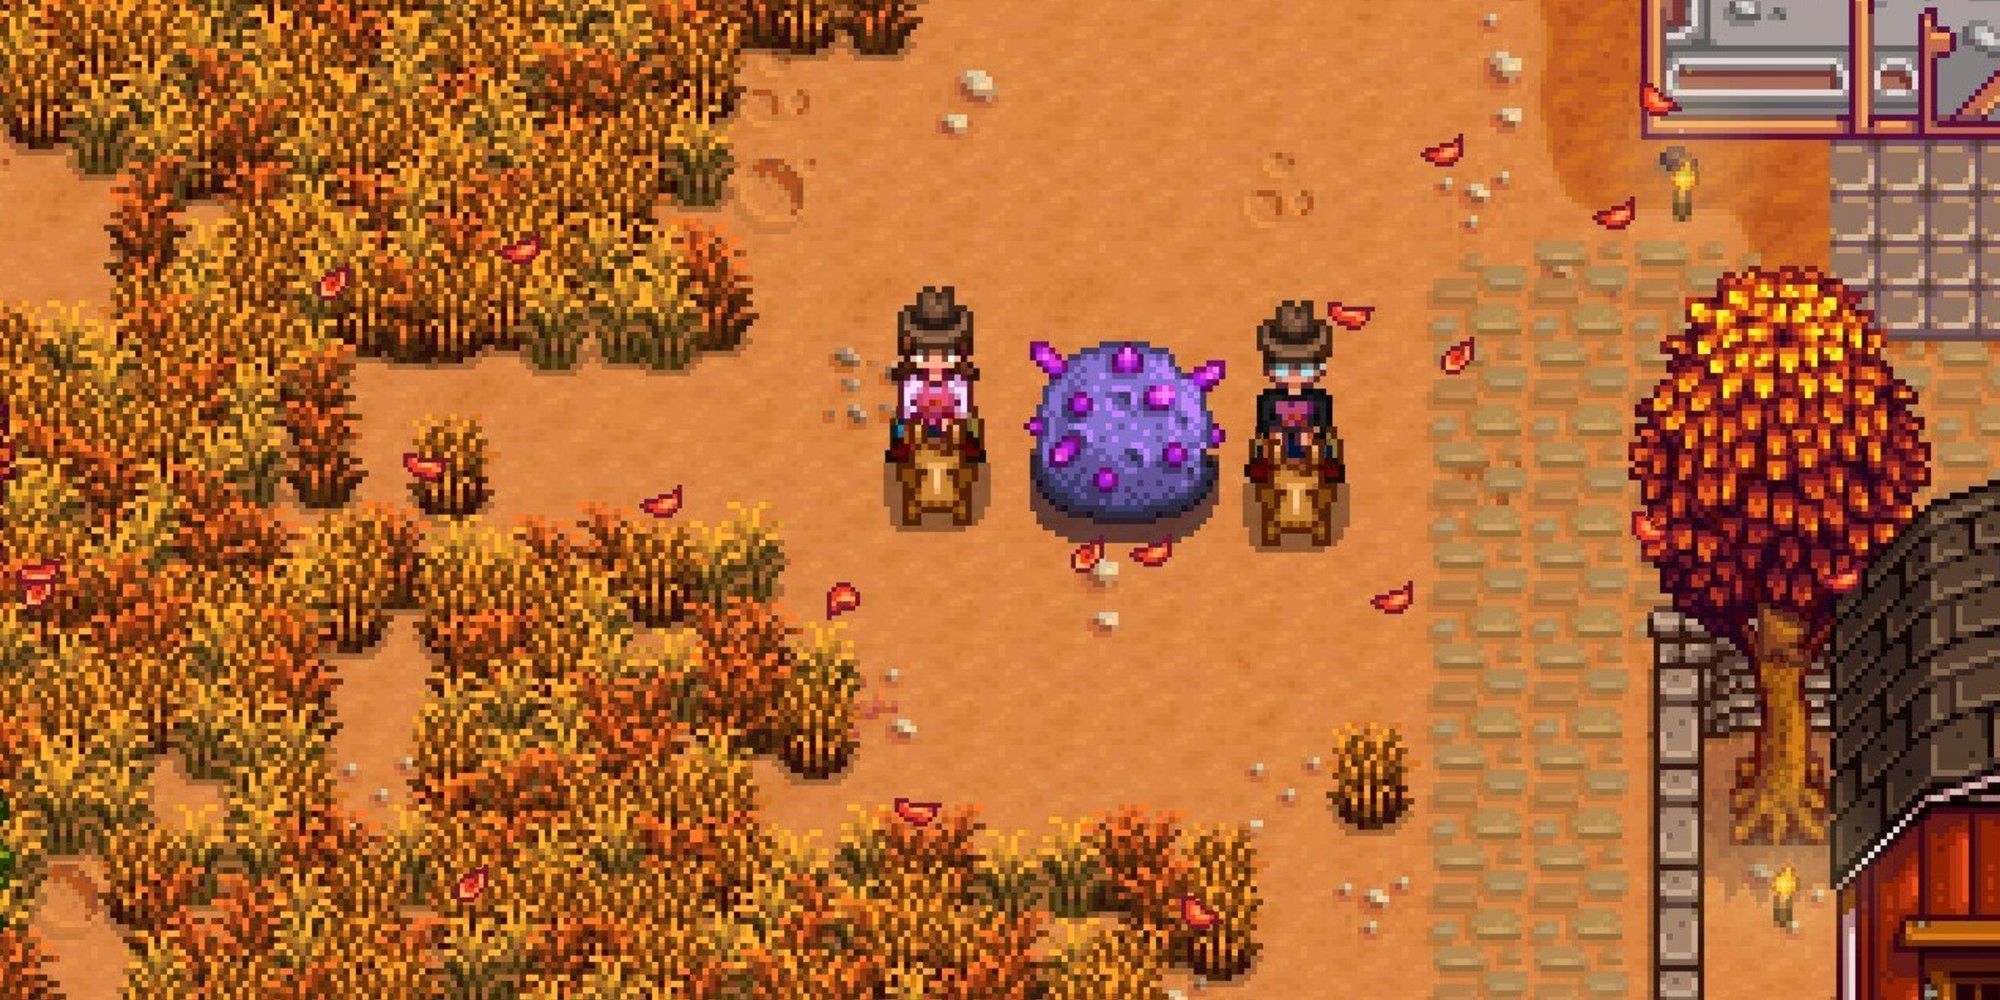 Two farmer on horses stand on either side of a purple meteorite in an overgrown farm field